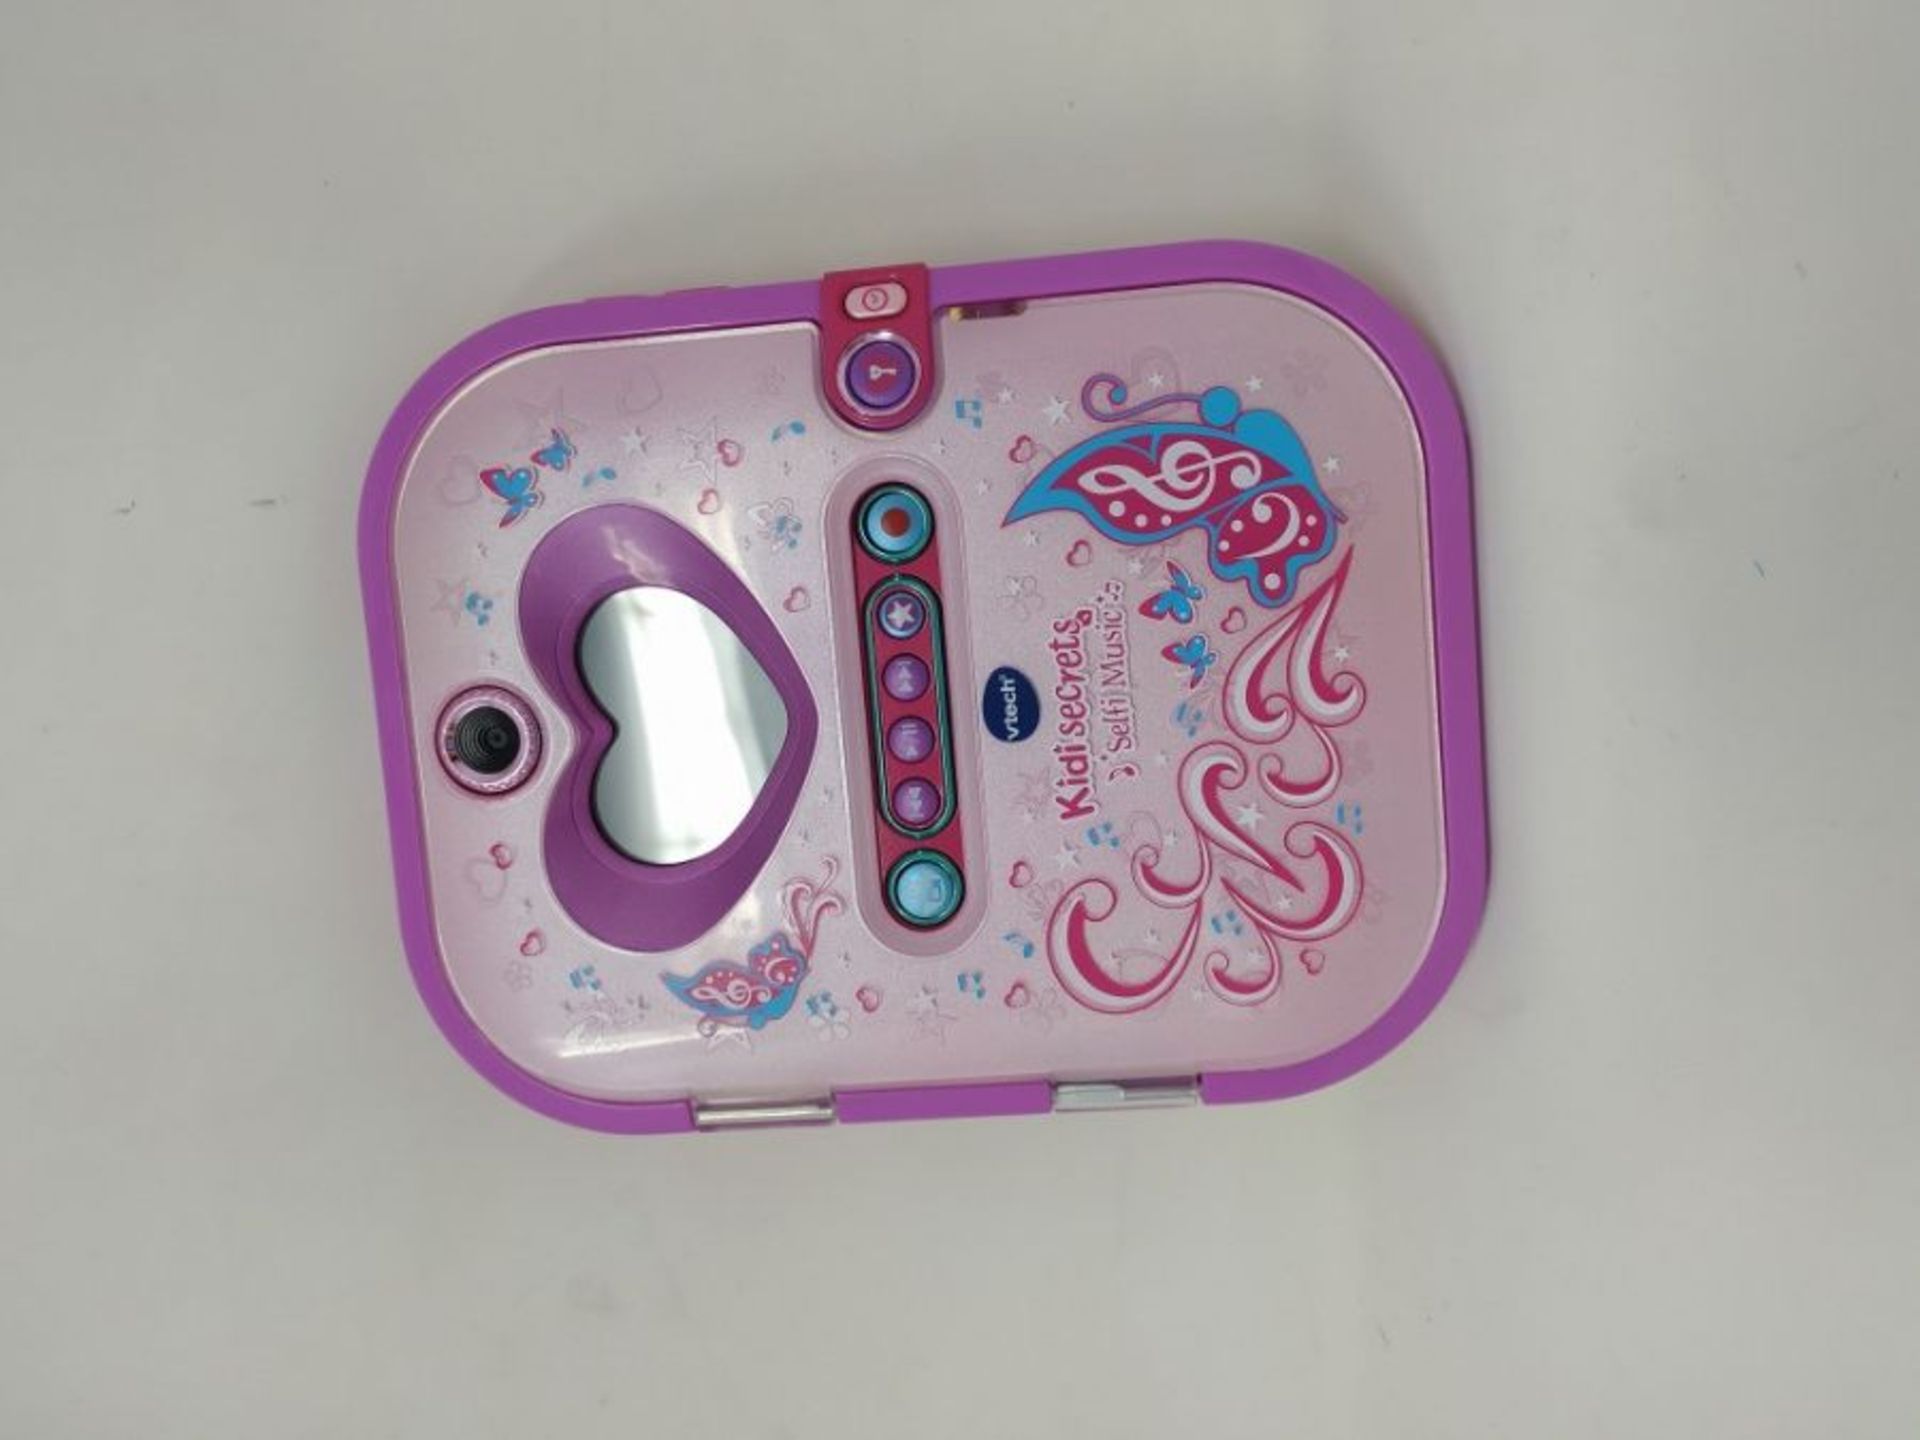 VTech KidiSecrets Selfi Music Personal Electronic Journal with Dual Camera for Photos - Image 2 of 2